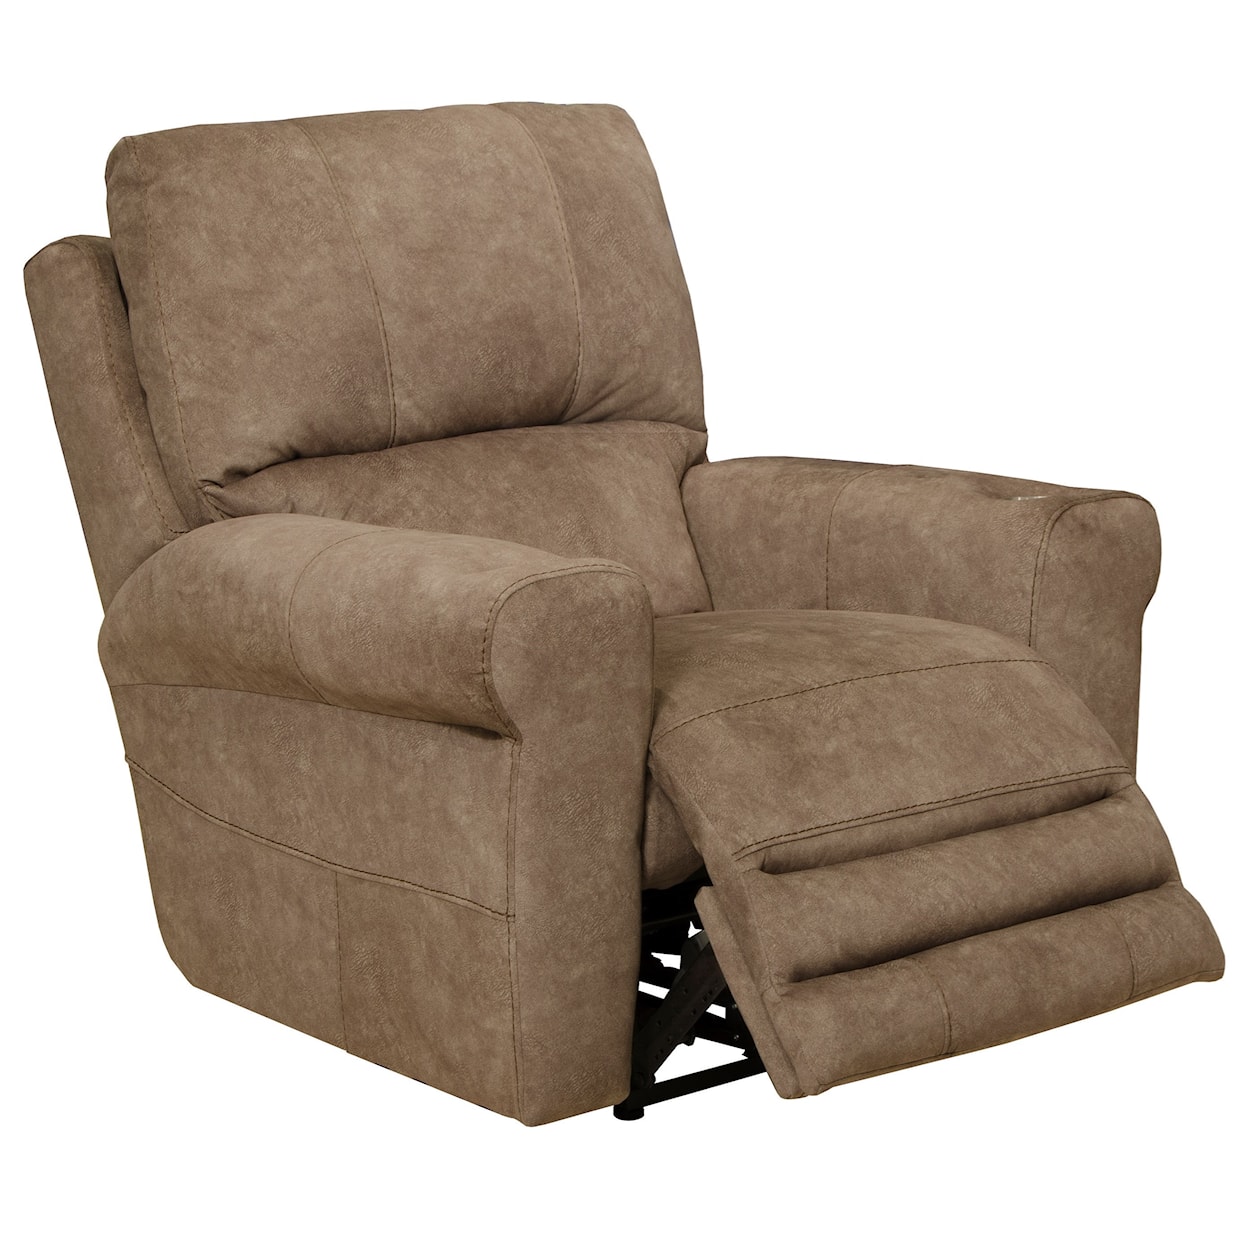 Catnapper 4786 Vance Voice-Controlled Power Lay Flat Recliner